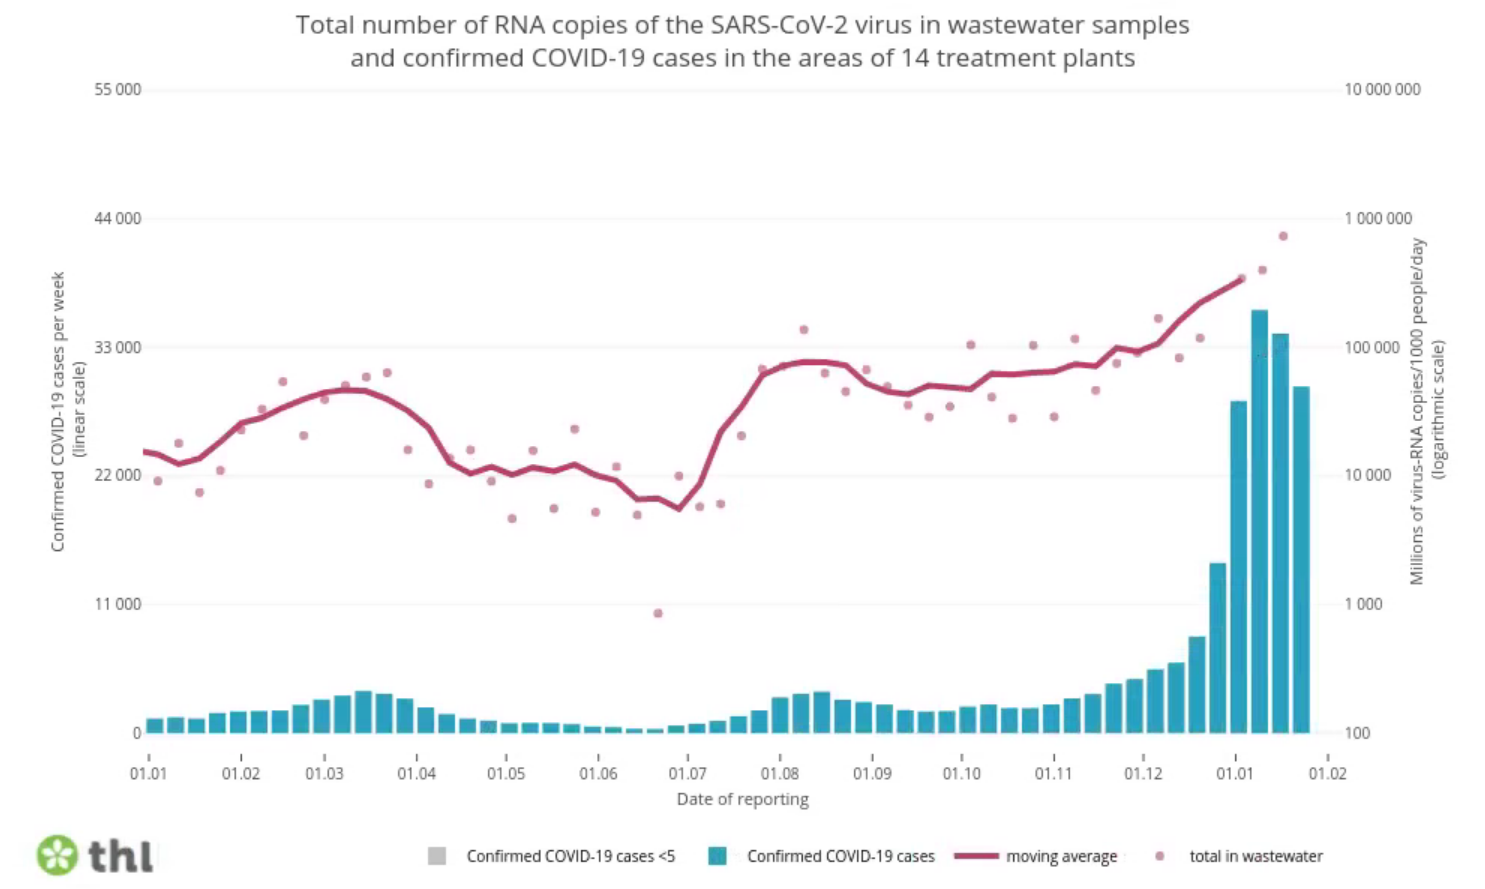 The longer-term trend of coronavirus RNA numbers in Finnish wastewater from 14 treatment plants has increased for several weeks already in line with the increase in the number of COVID-19 cases detected